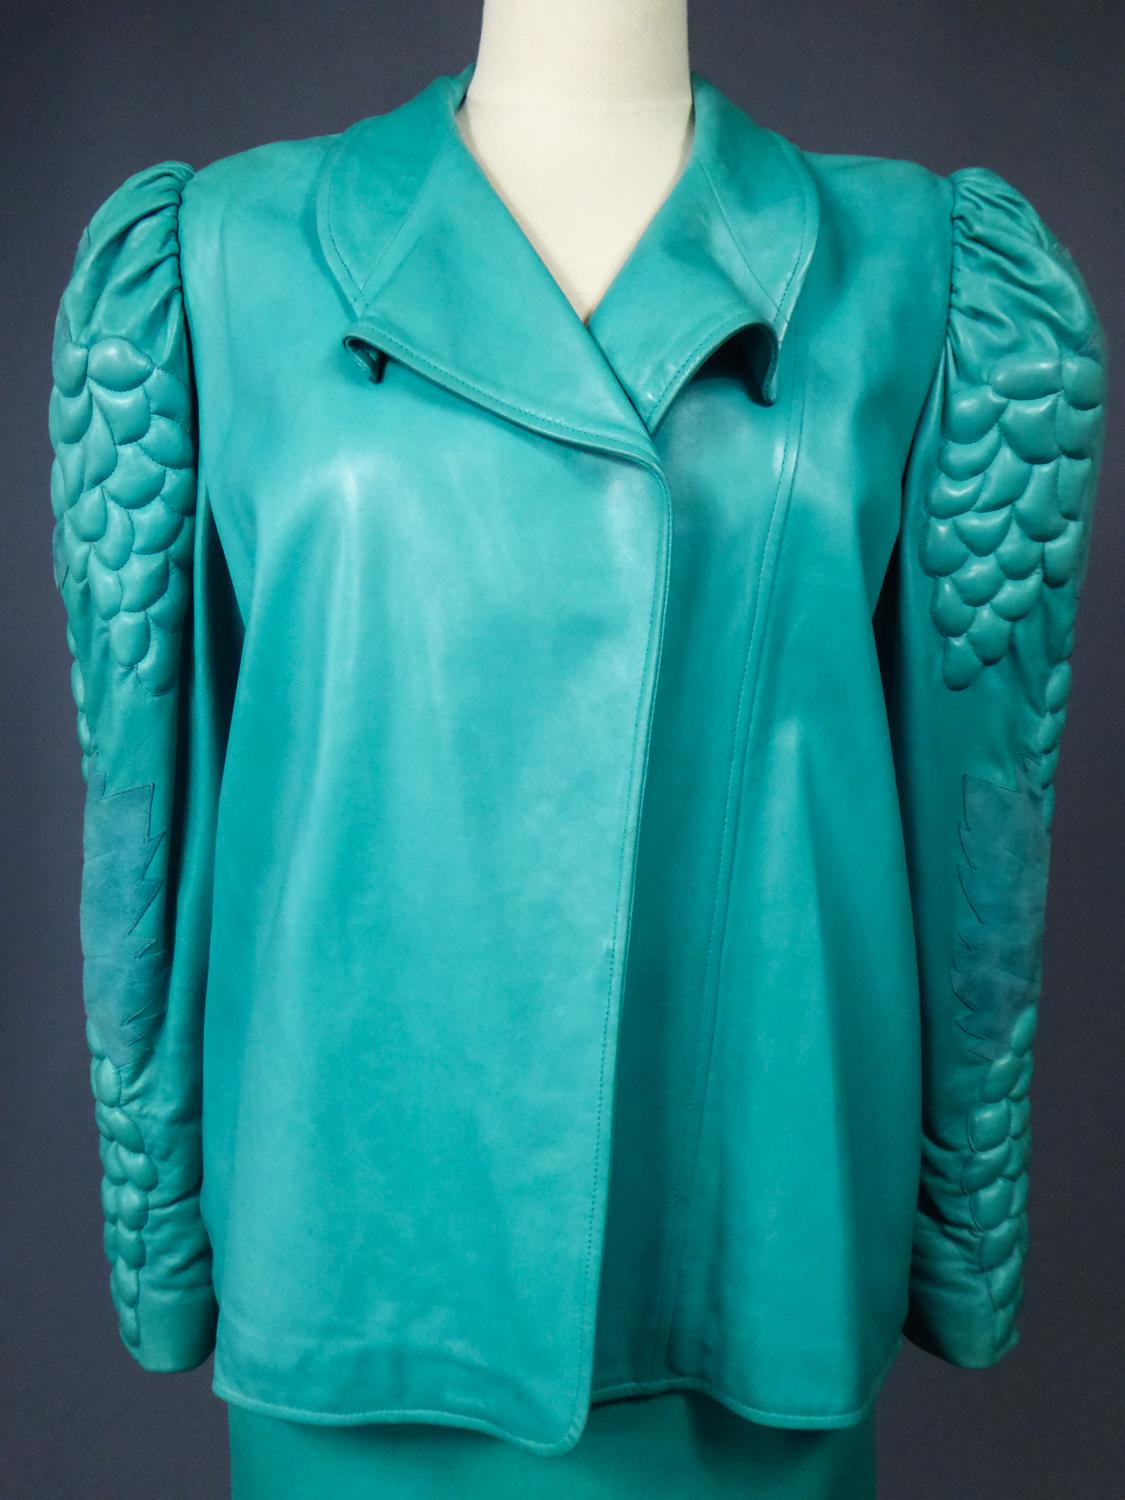 A Jean-Claude Jitrois Skirt and Jacket in Turquoise Leather - Fall 1985/1986  For Sale 6